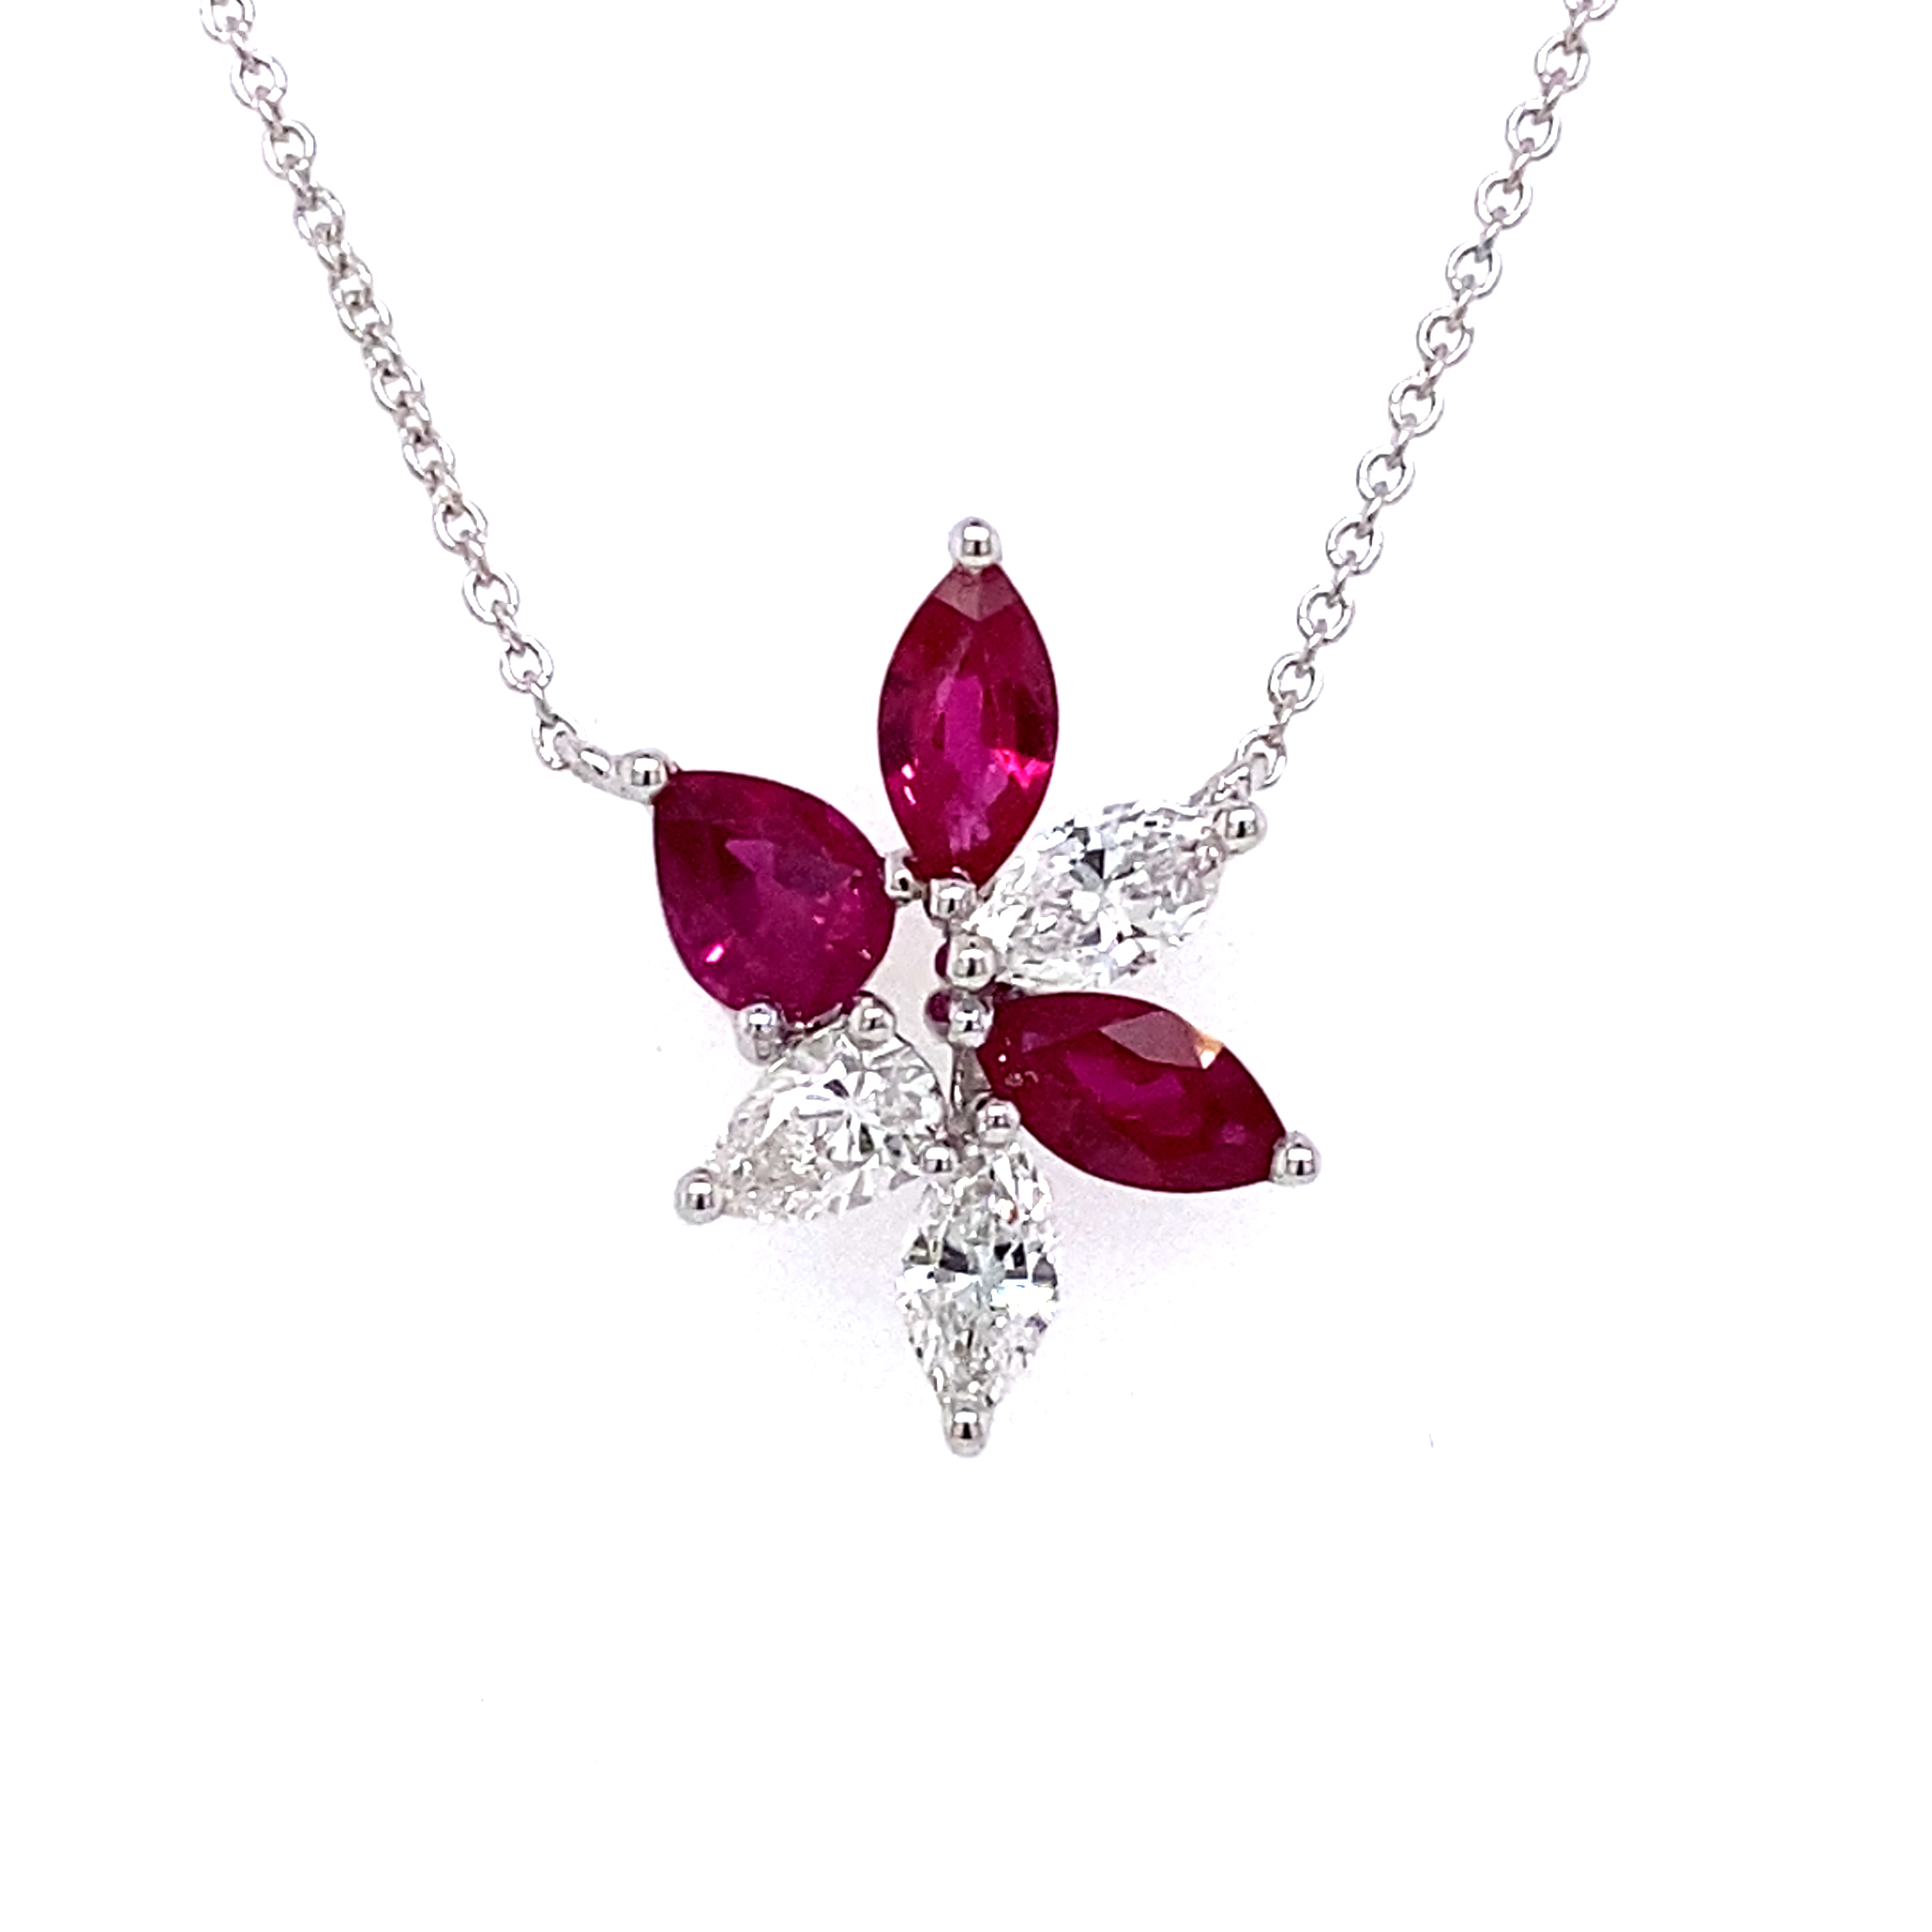 18 Carat White Gold, Ruby and Diamond Necklet